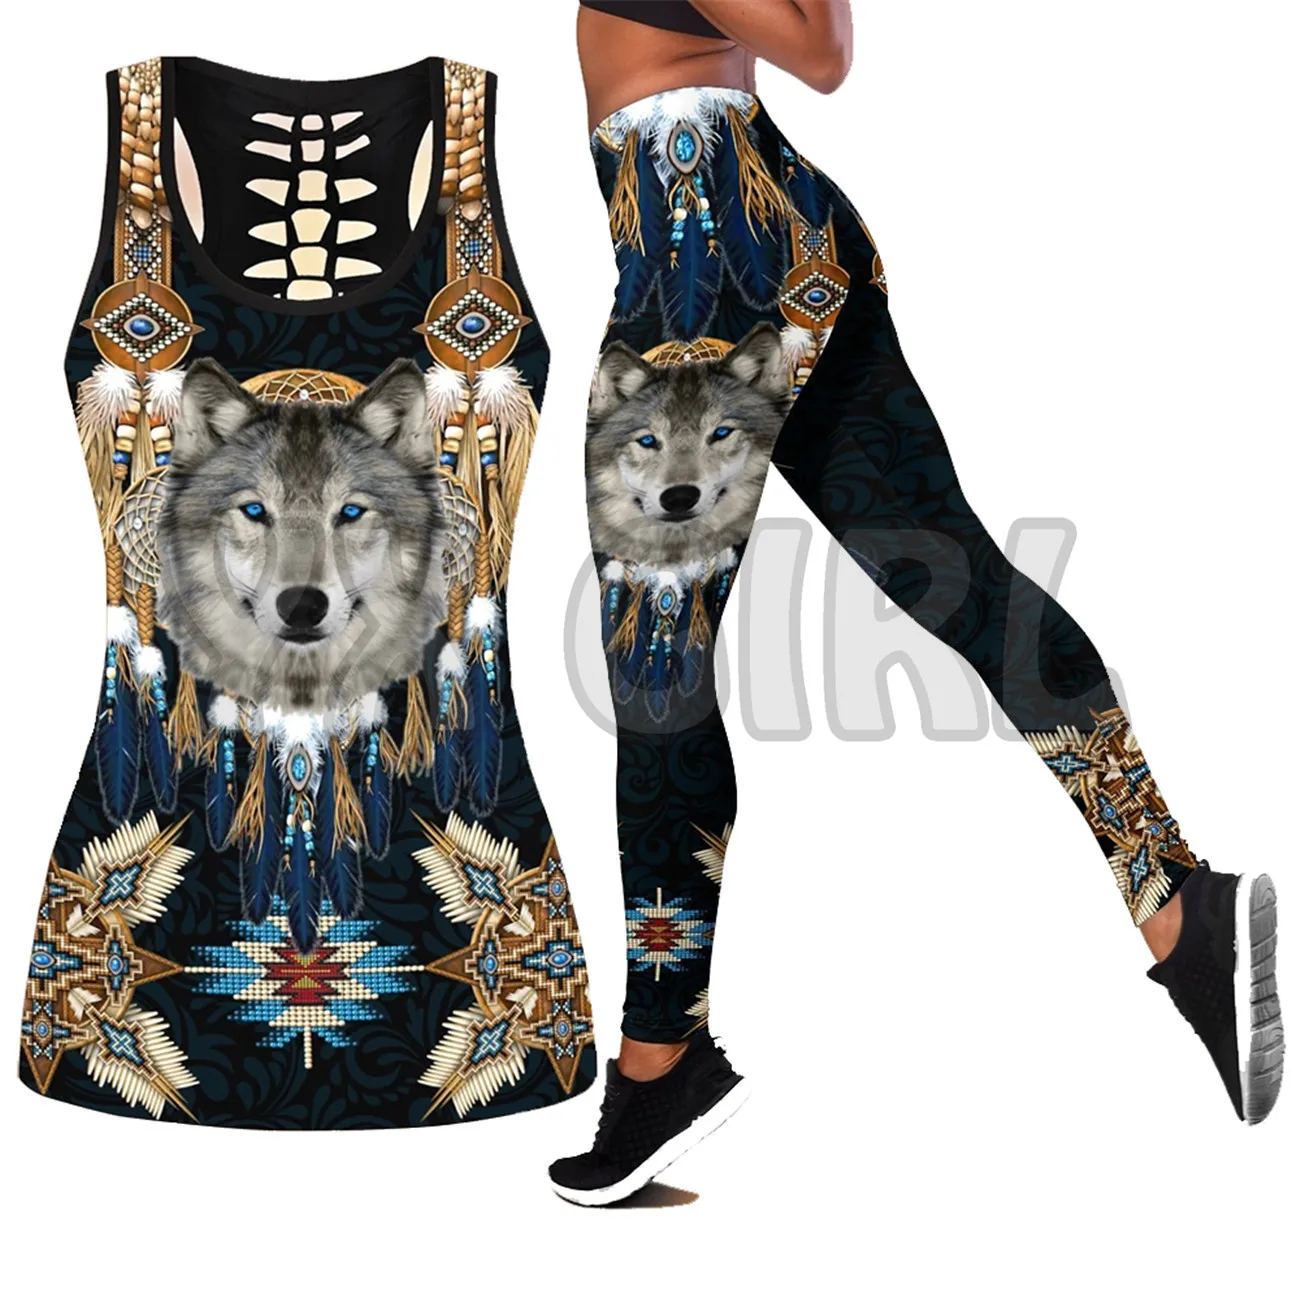 Native Love Wolf 3D Printed Tank Top+Legging Combo Outfit Yoga Fitness Legging Women